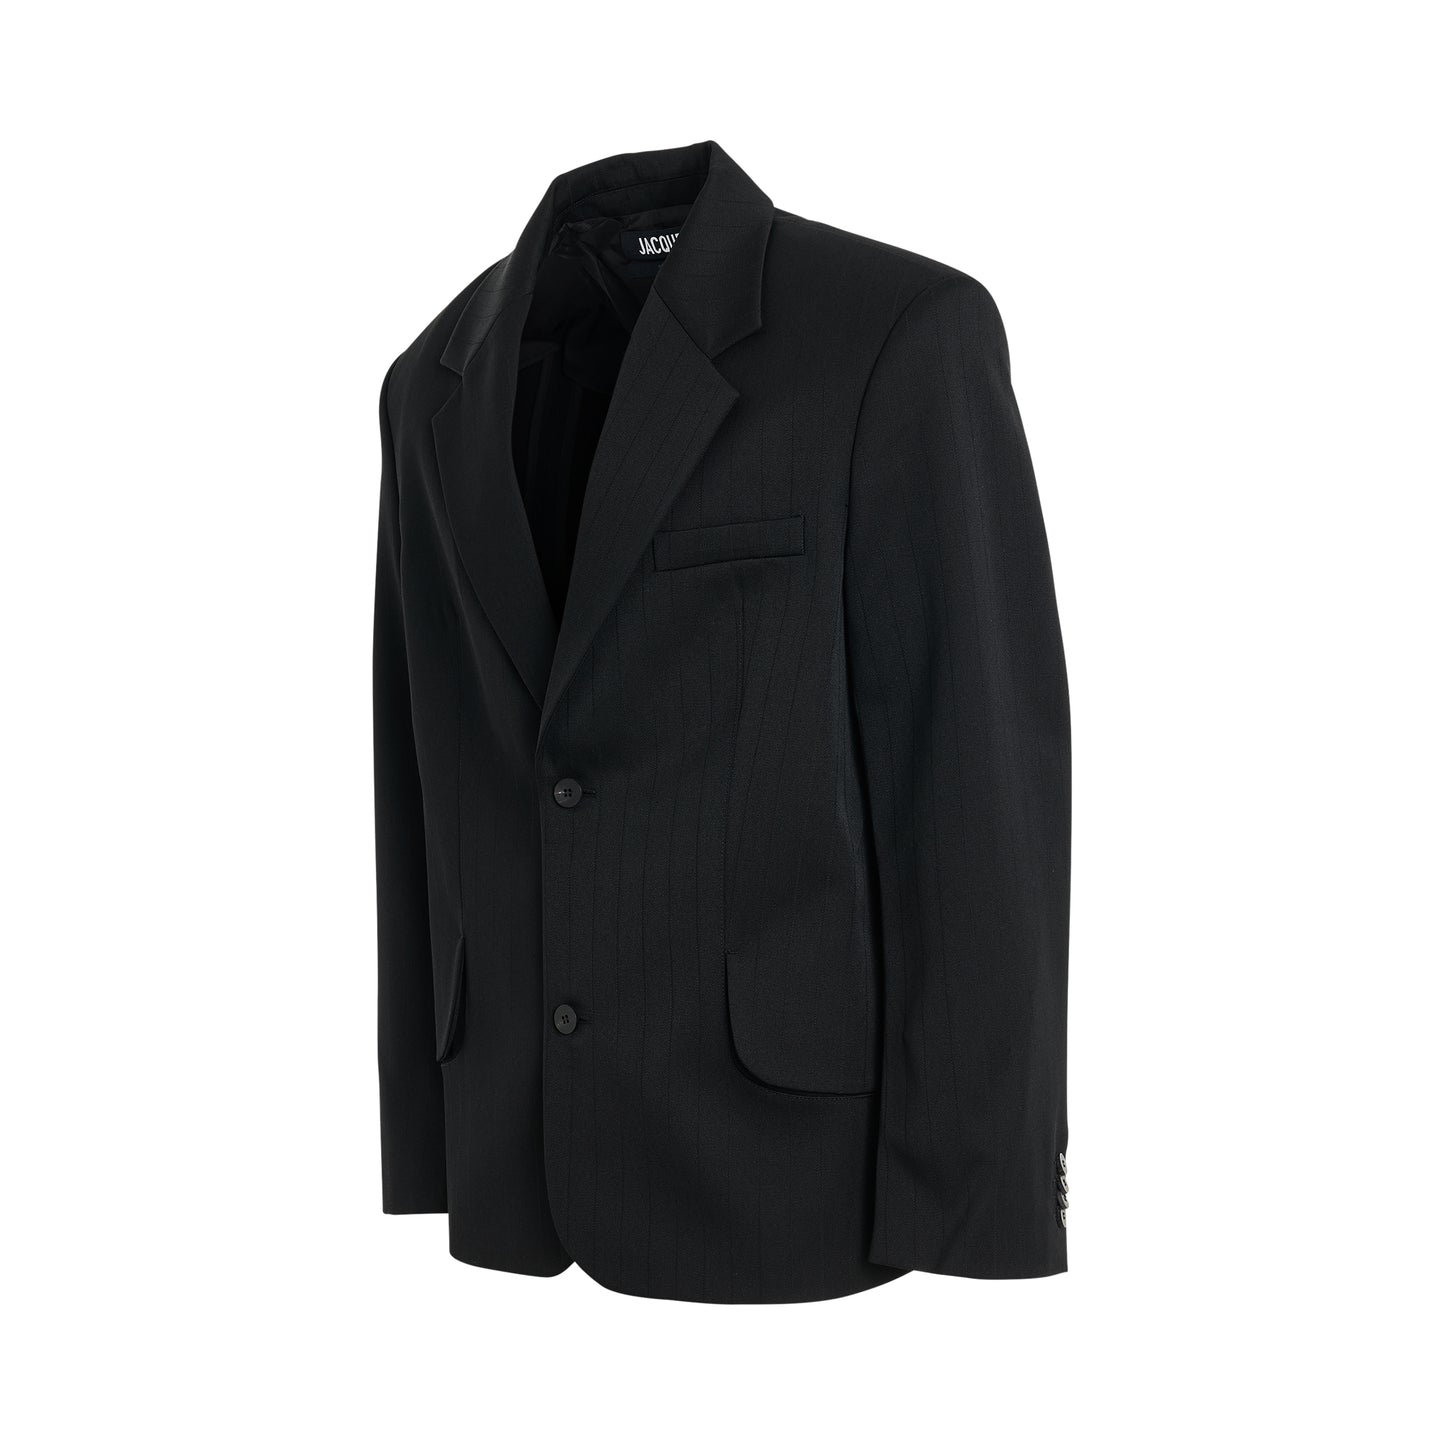 Titolo Suit Jacket in Pinstripe Black